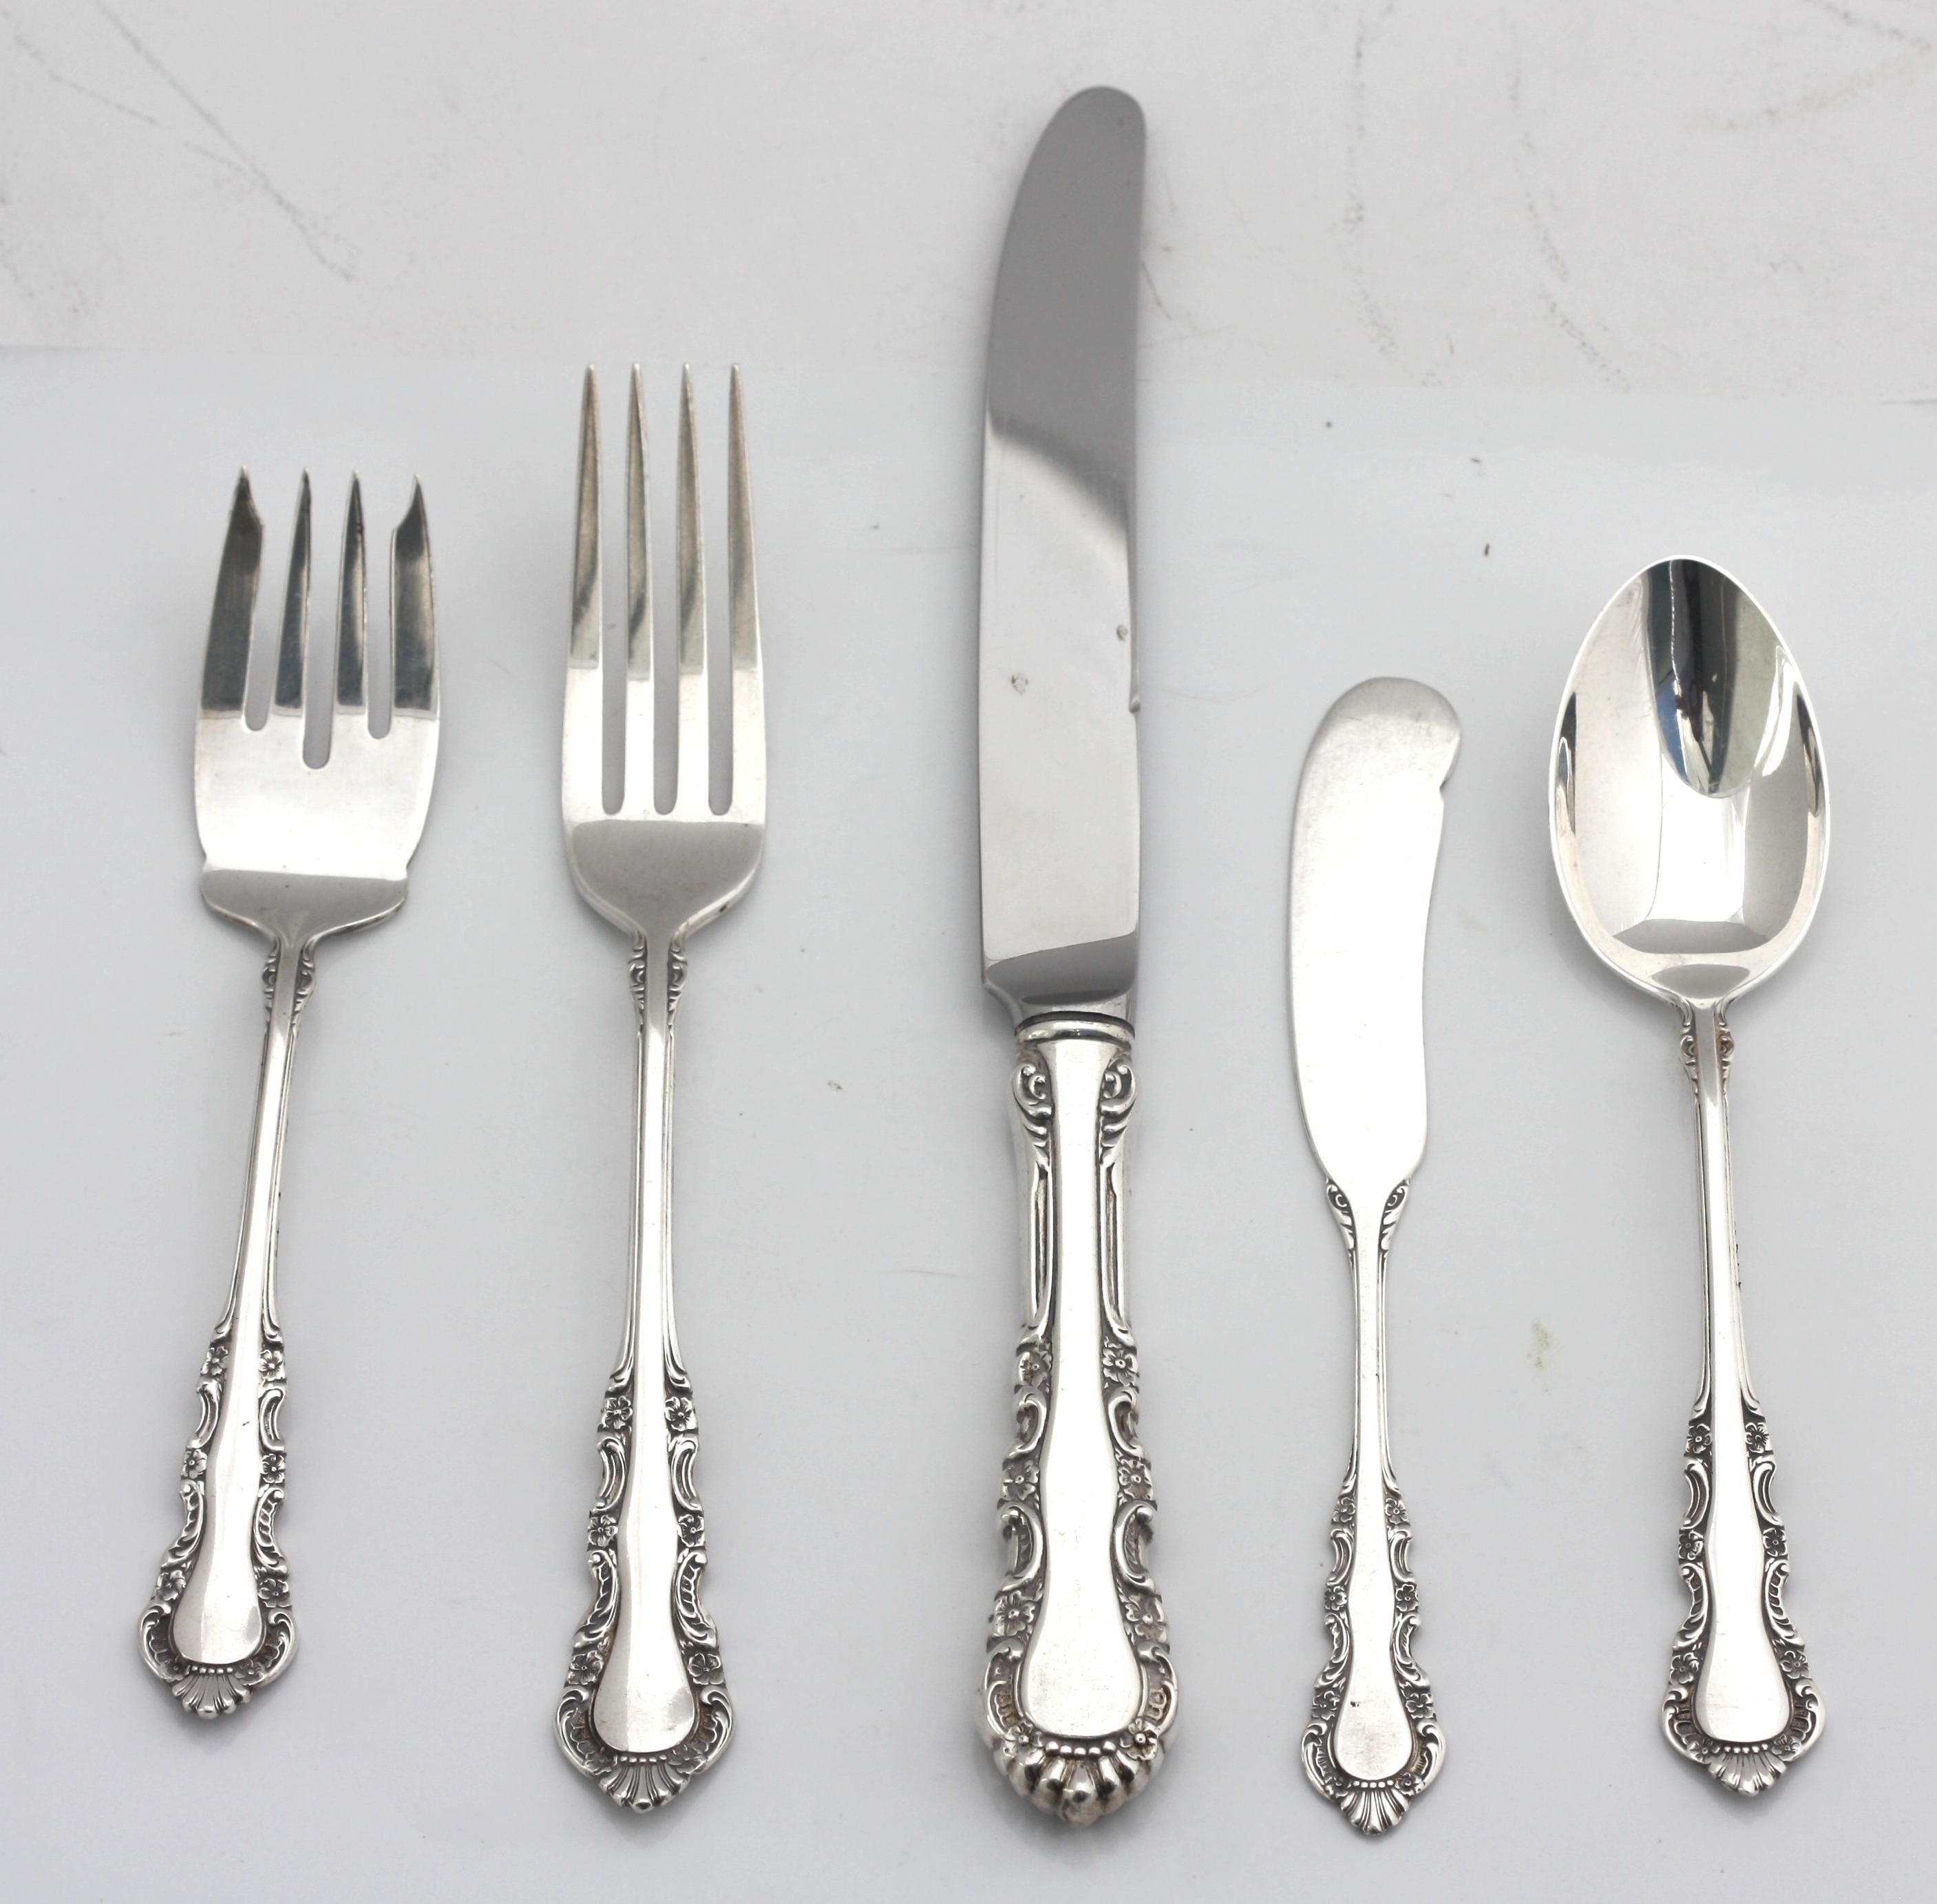  Reed & Barton Sterling Silver Fifty-Nine Piece Flatware Service  For Sale 4